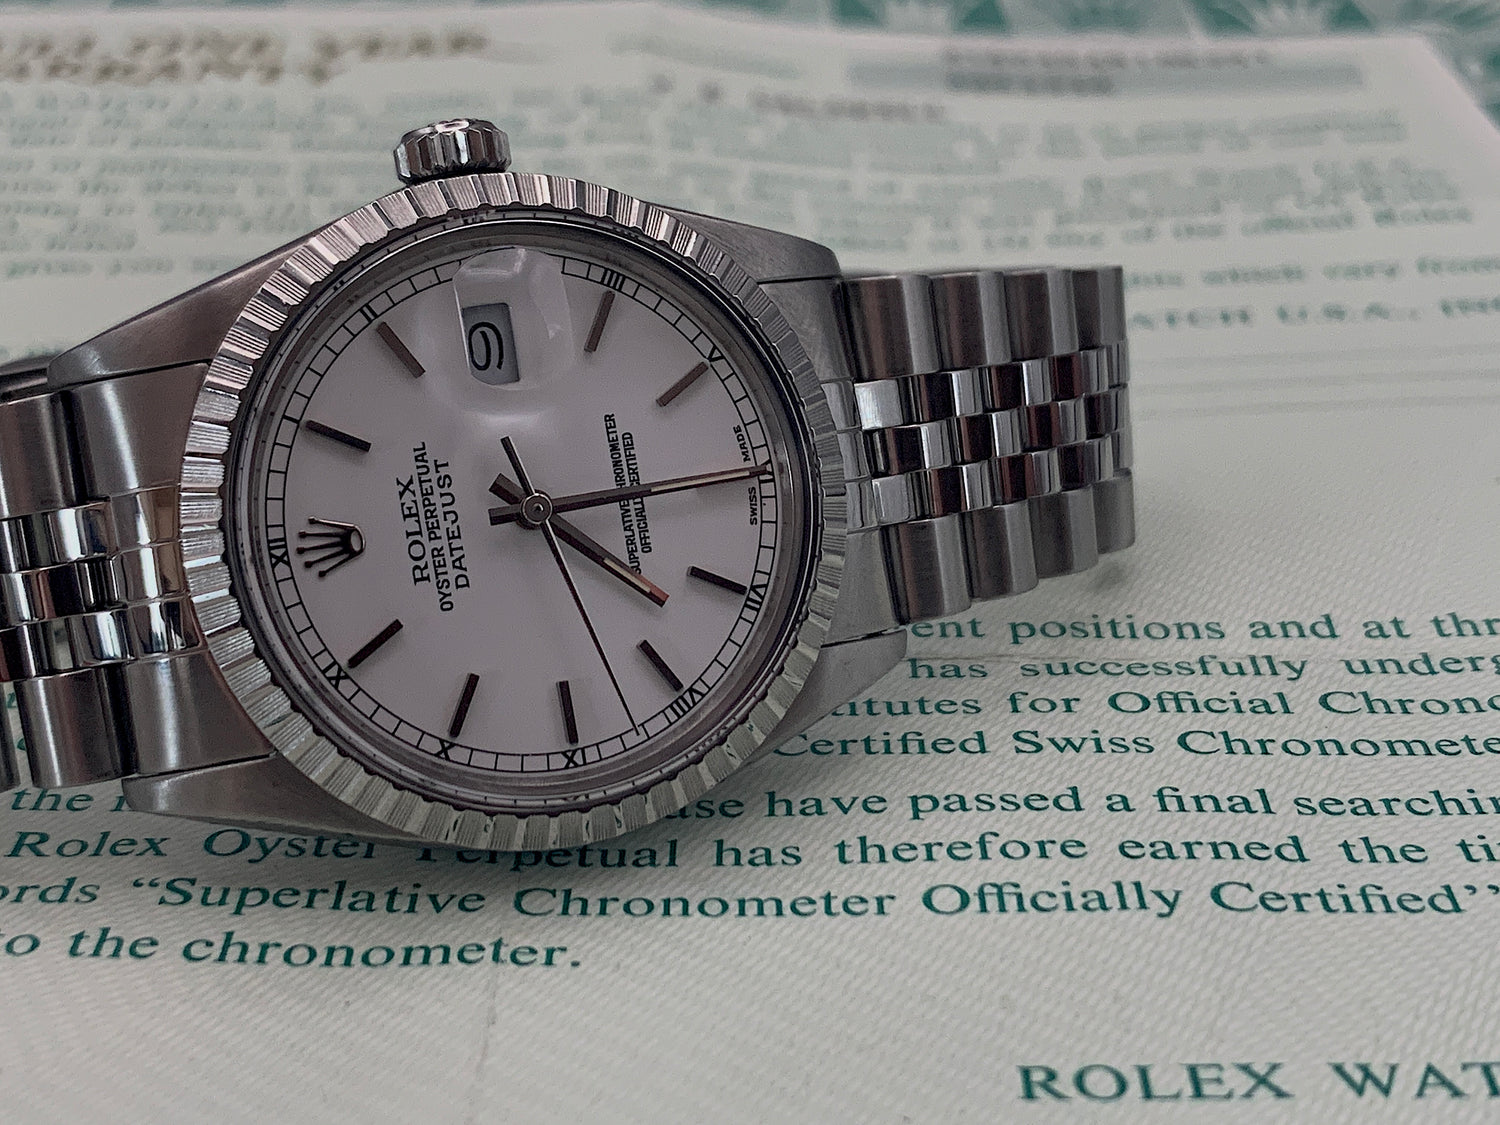 SOLD Rolex Datejust 36 MINT 1986 - white dial / with papers